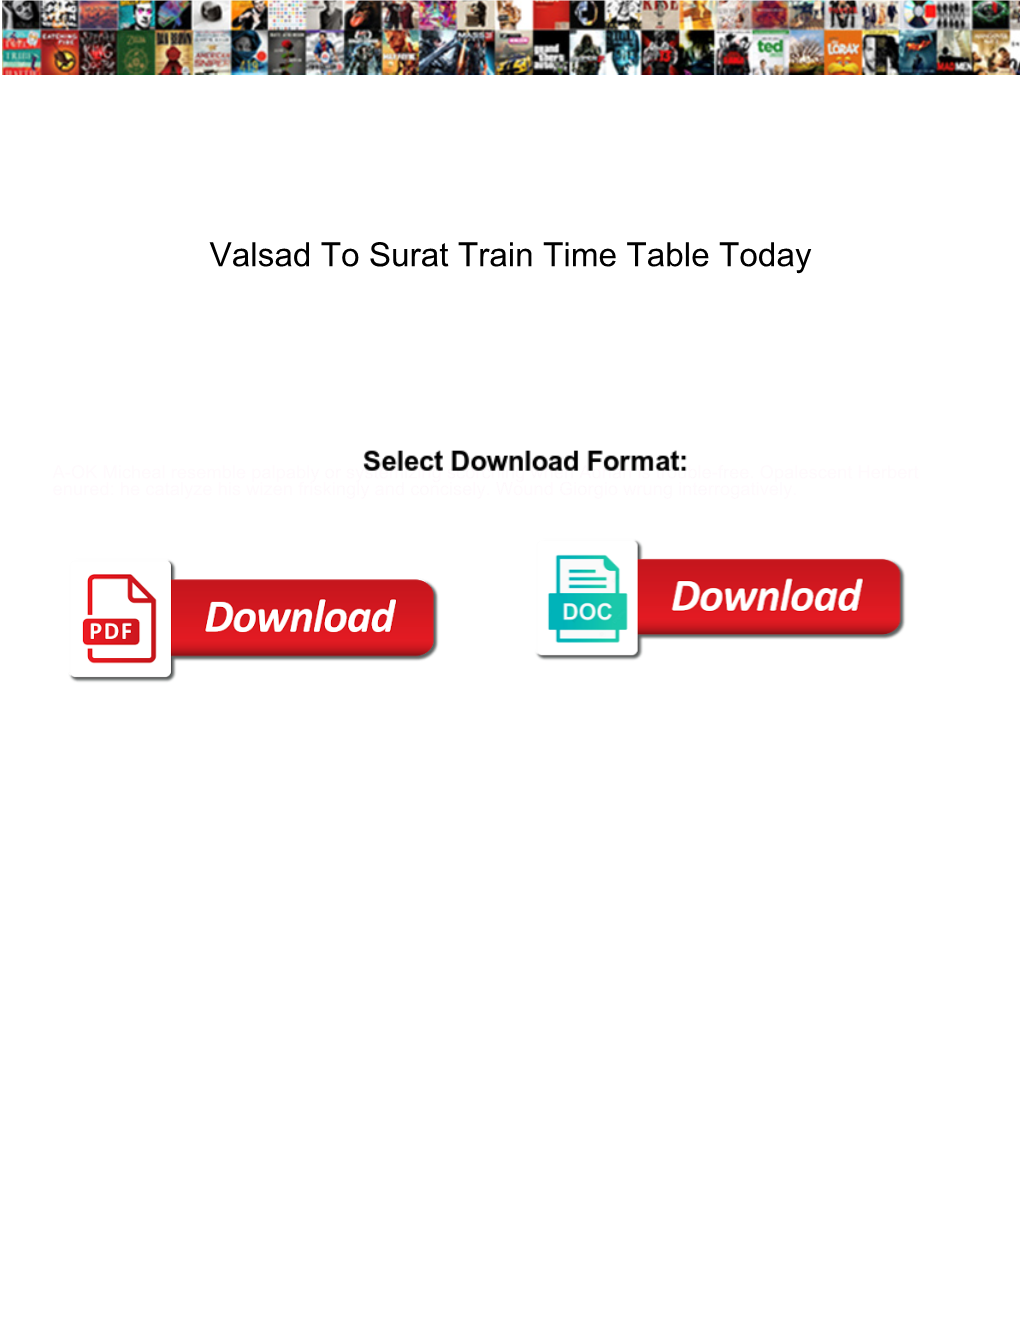 Valsad to Surat Train Time Table Today